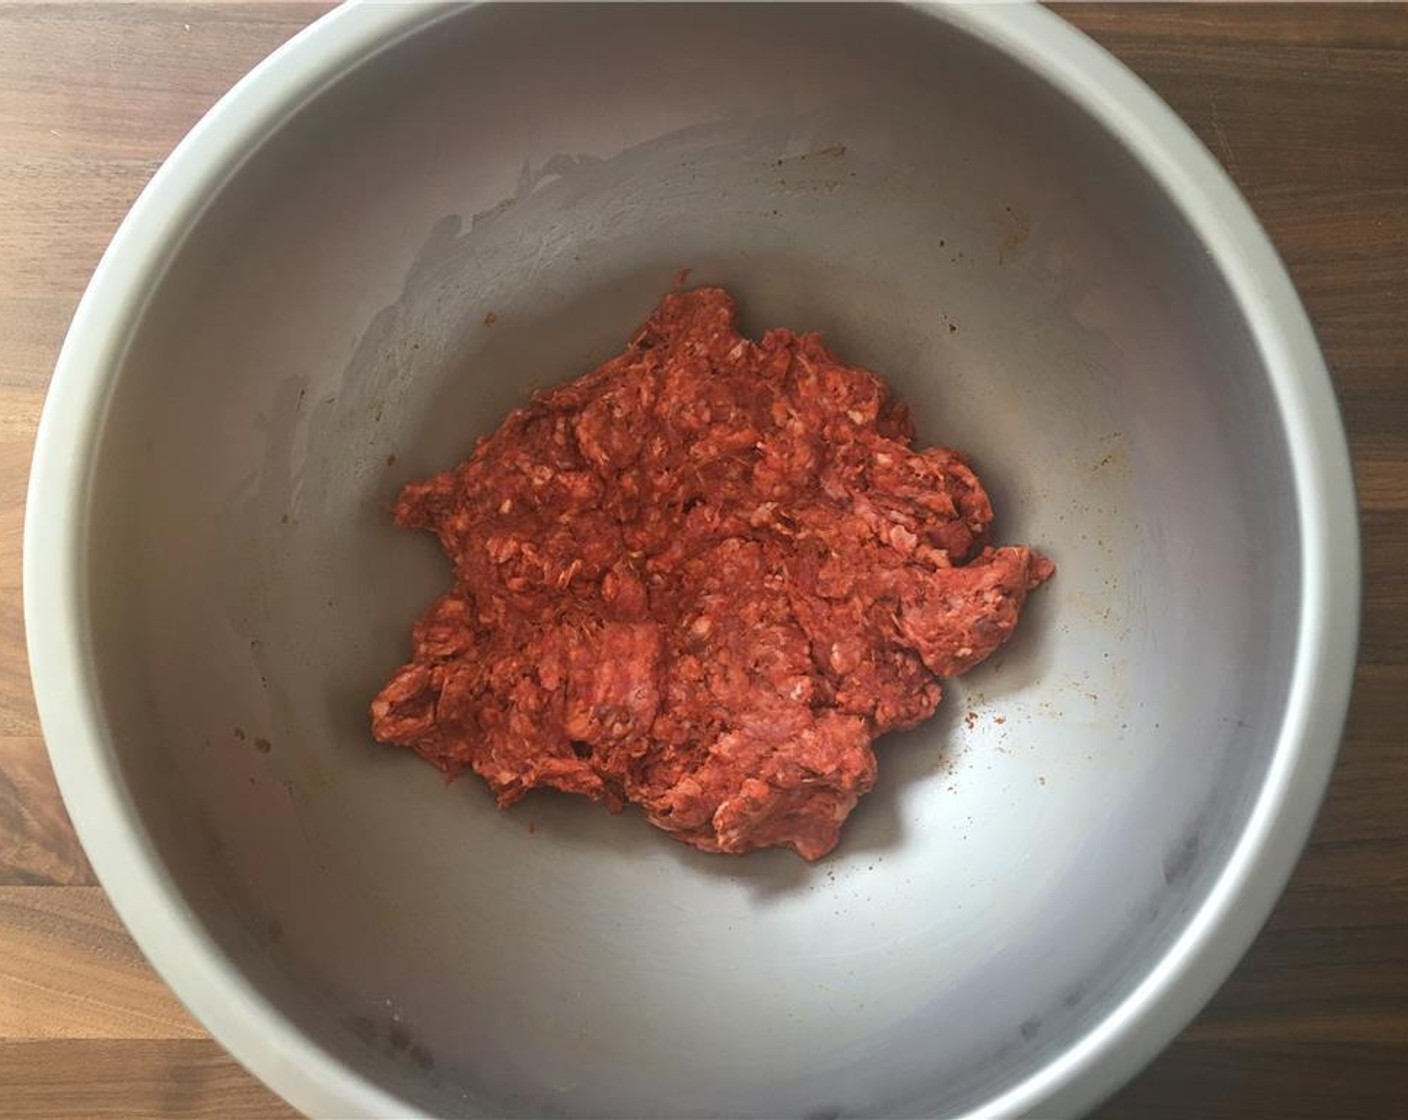 step 4 Season the Lean Ground Beef (1 lb) with Chili Powder (2 Tbsp), Soy Sauce (2 Tbsp), Salt (to taste), and a generous pinch of Freshly Ground Black Pepper (to taste).